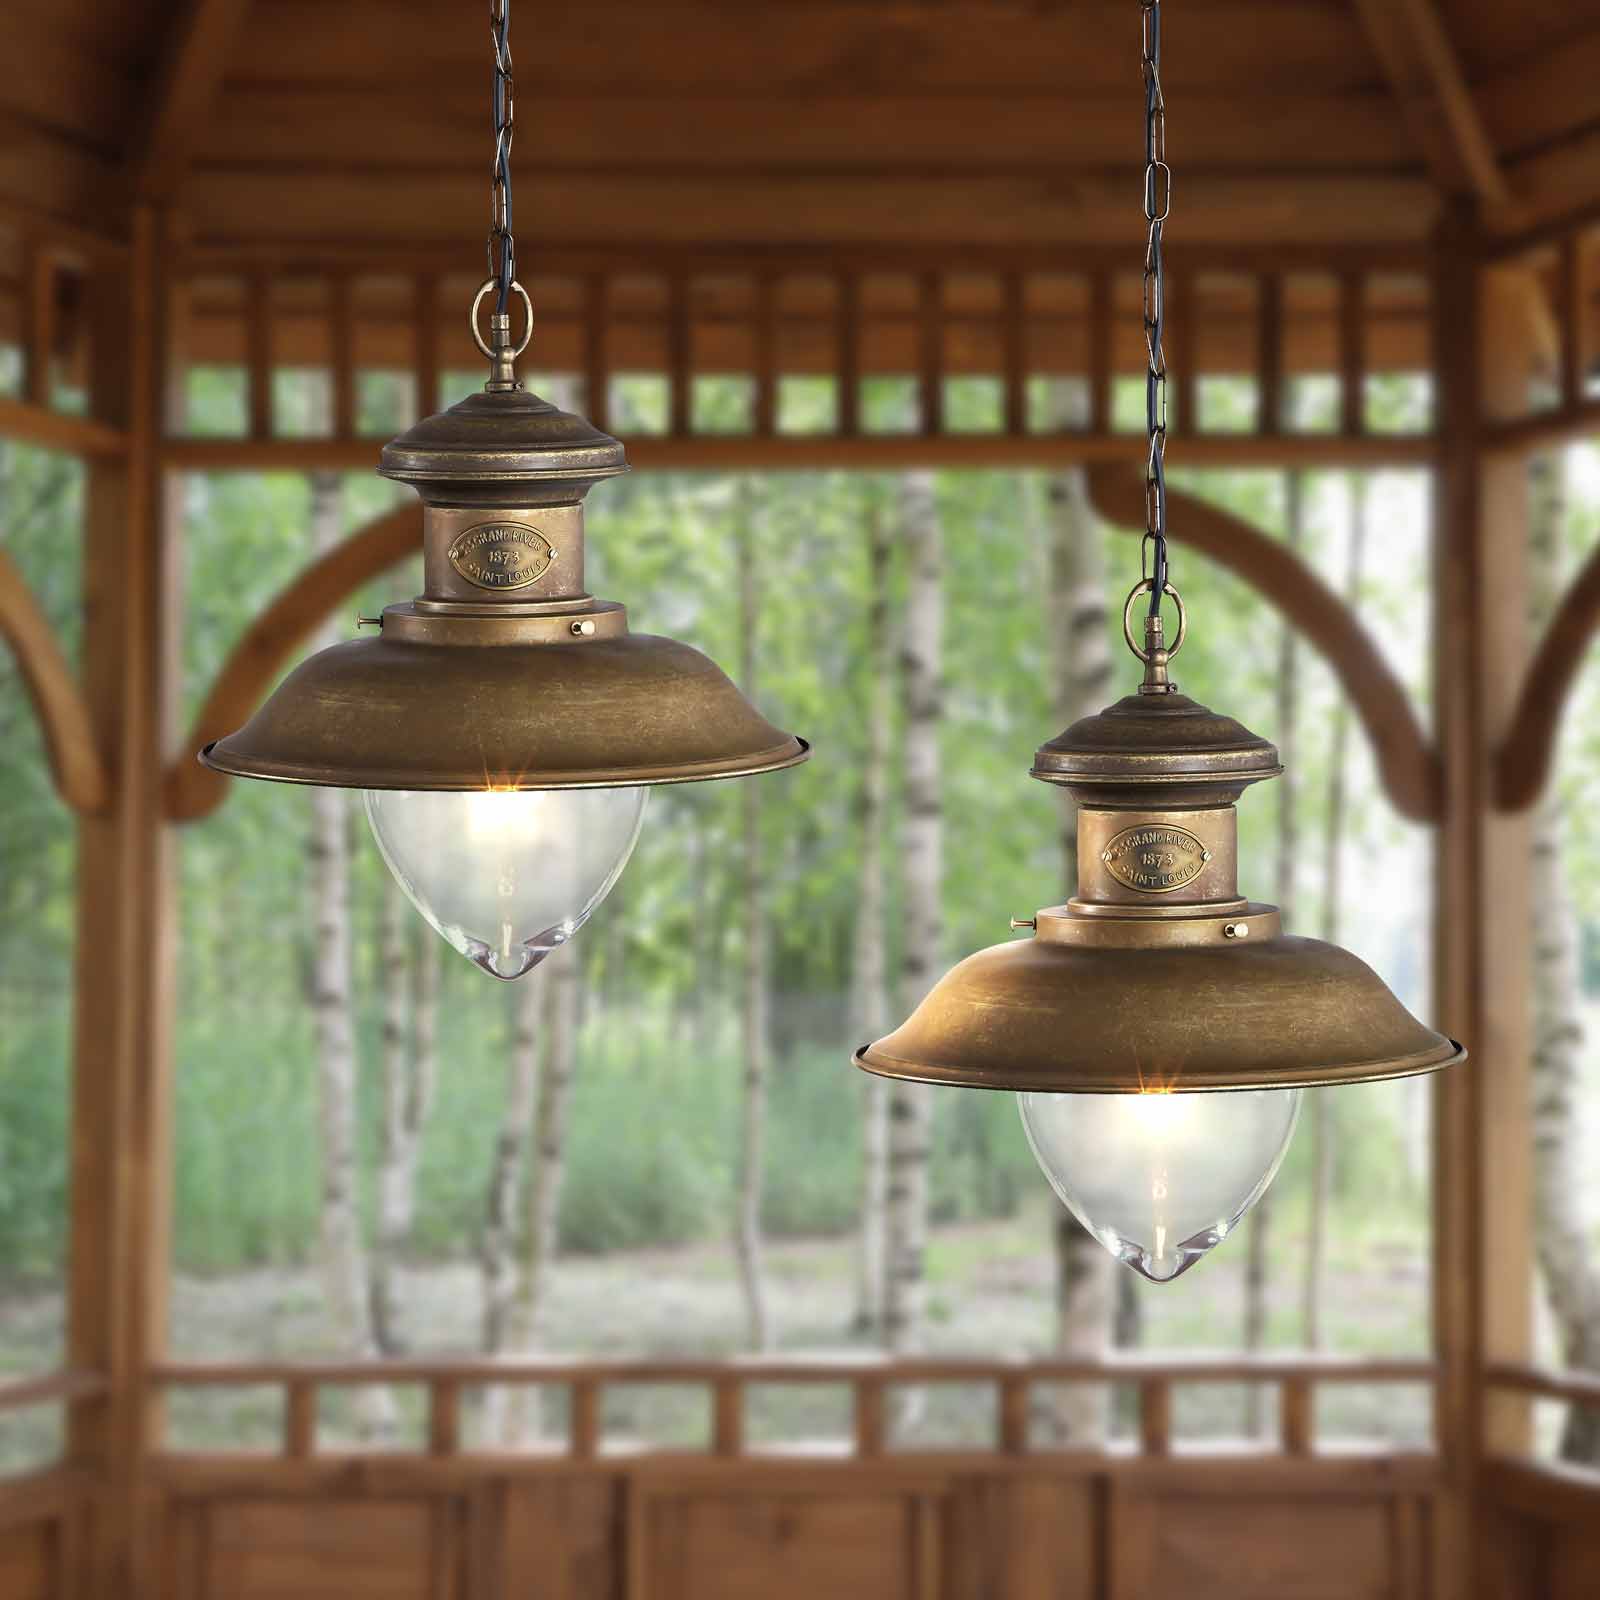 Outlaw renere frost Outdoor Pendant Lighting in Antique Solid Brass | Ghidini 1849